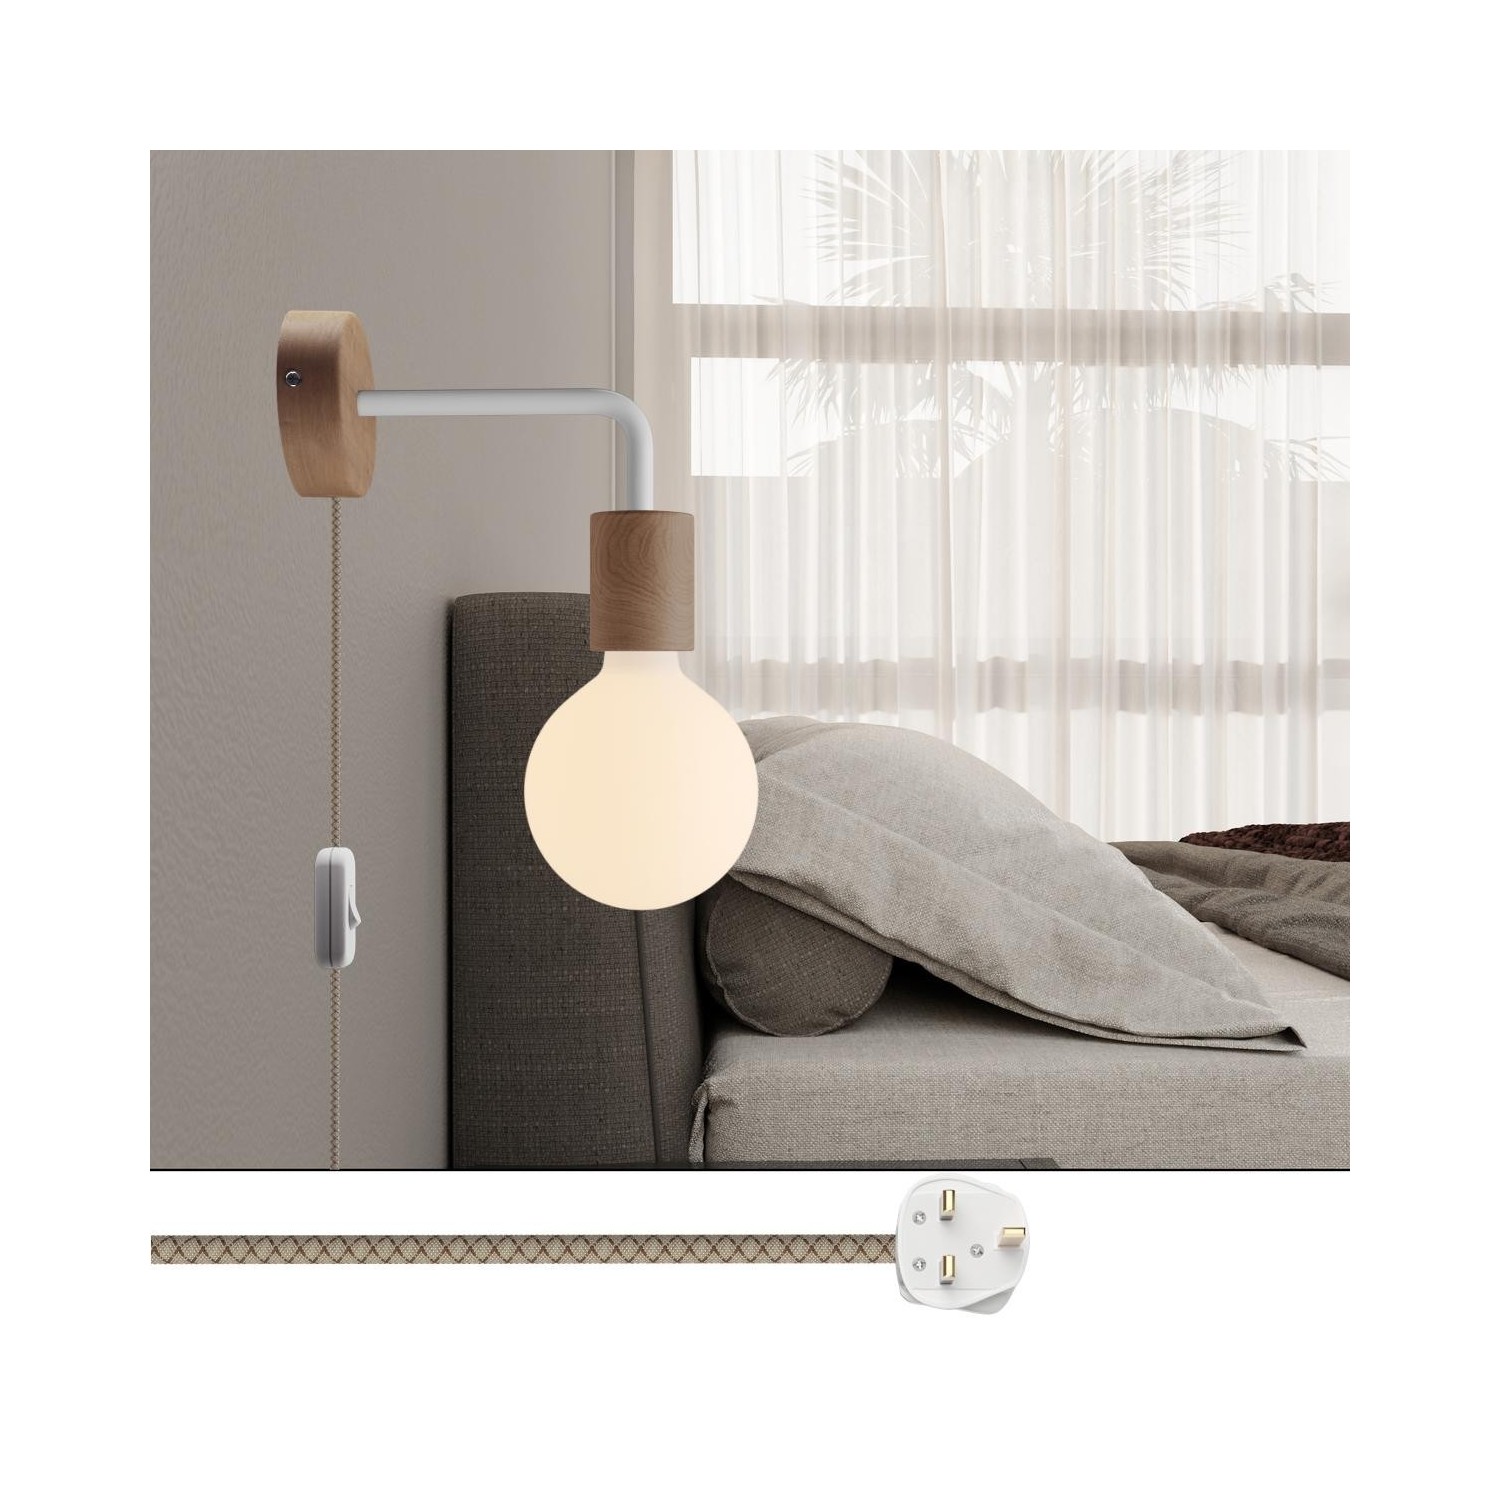 Spostaluce wooden Lamp with curved extension